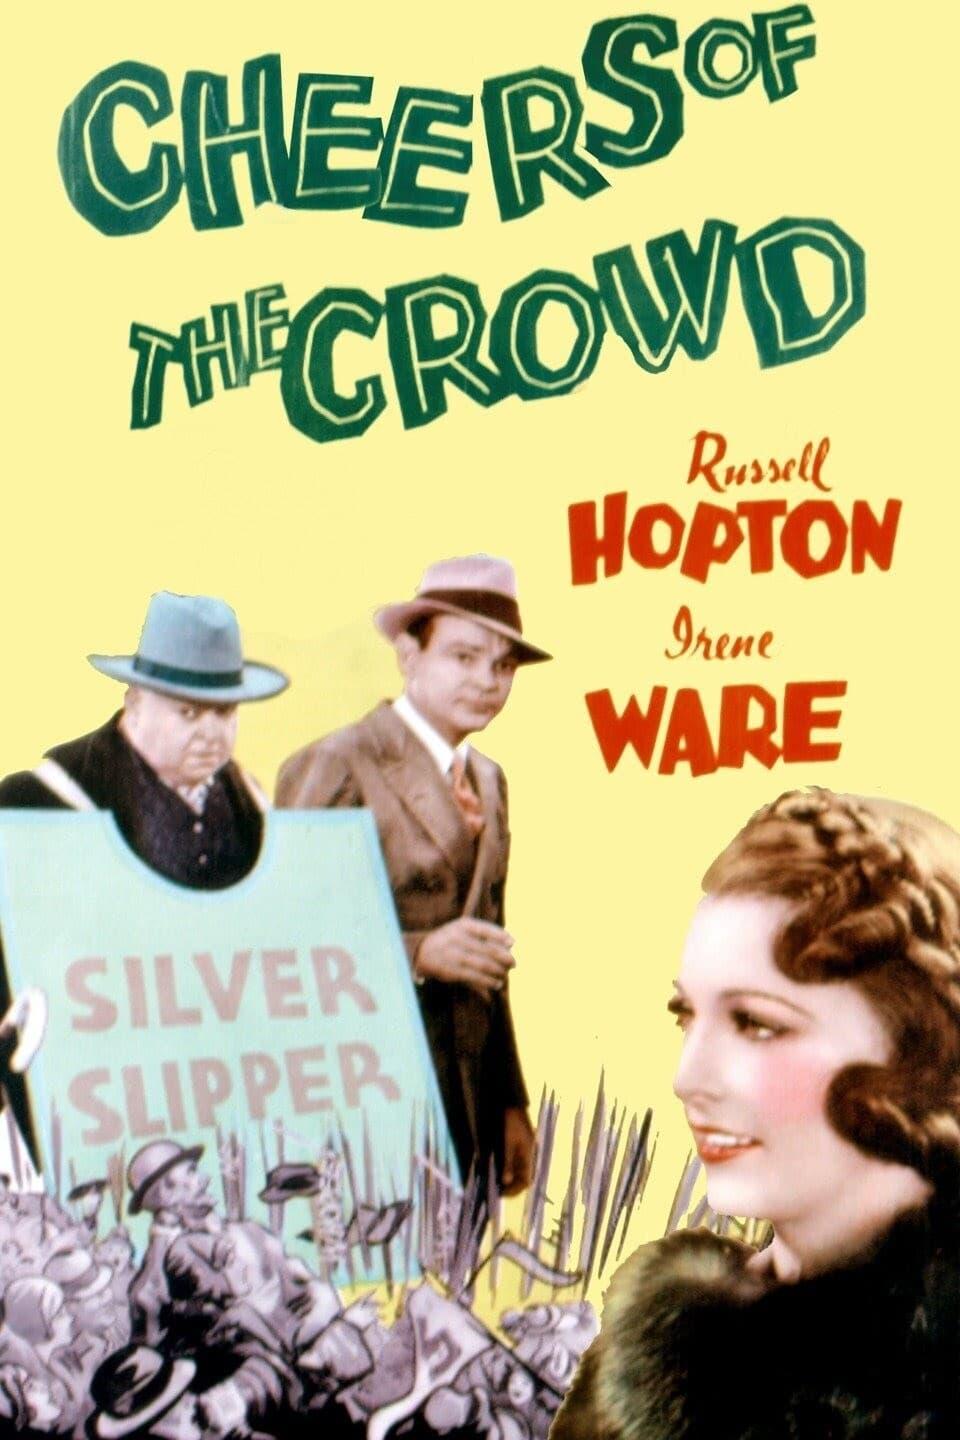 Cheers of the Crowd poster